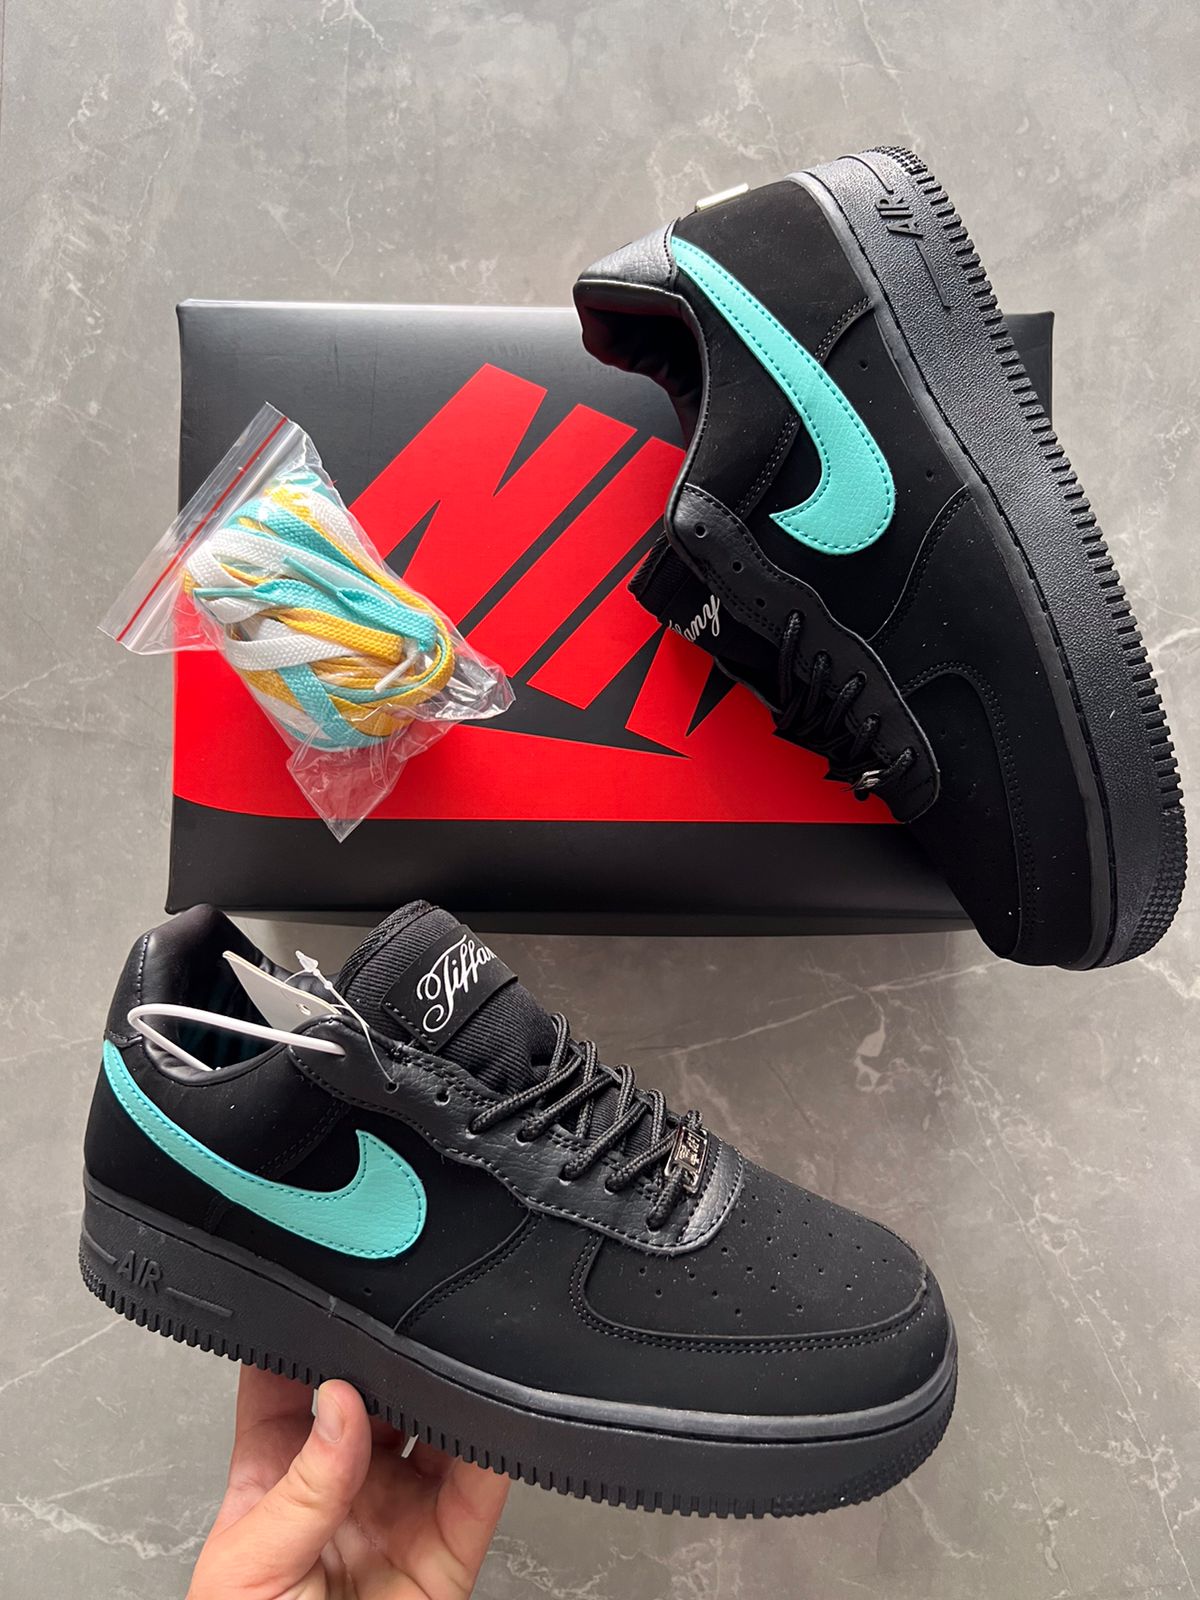 Airforce One Tiffany Sneakers For Boys